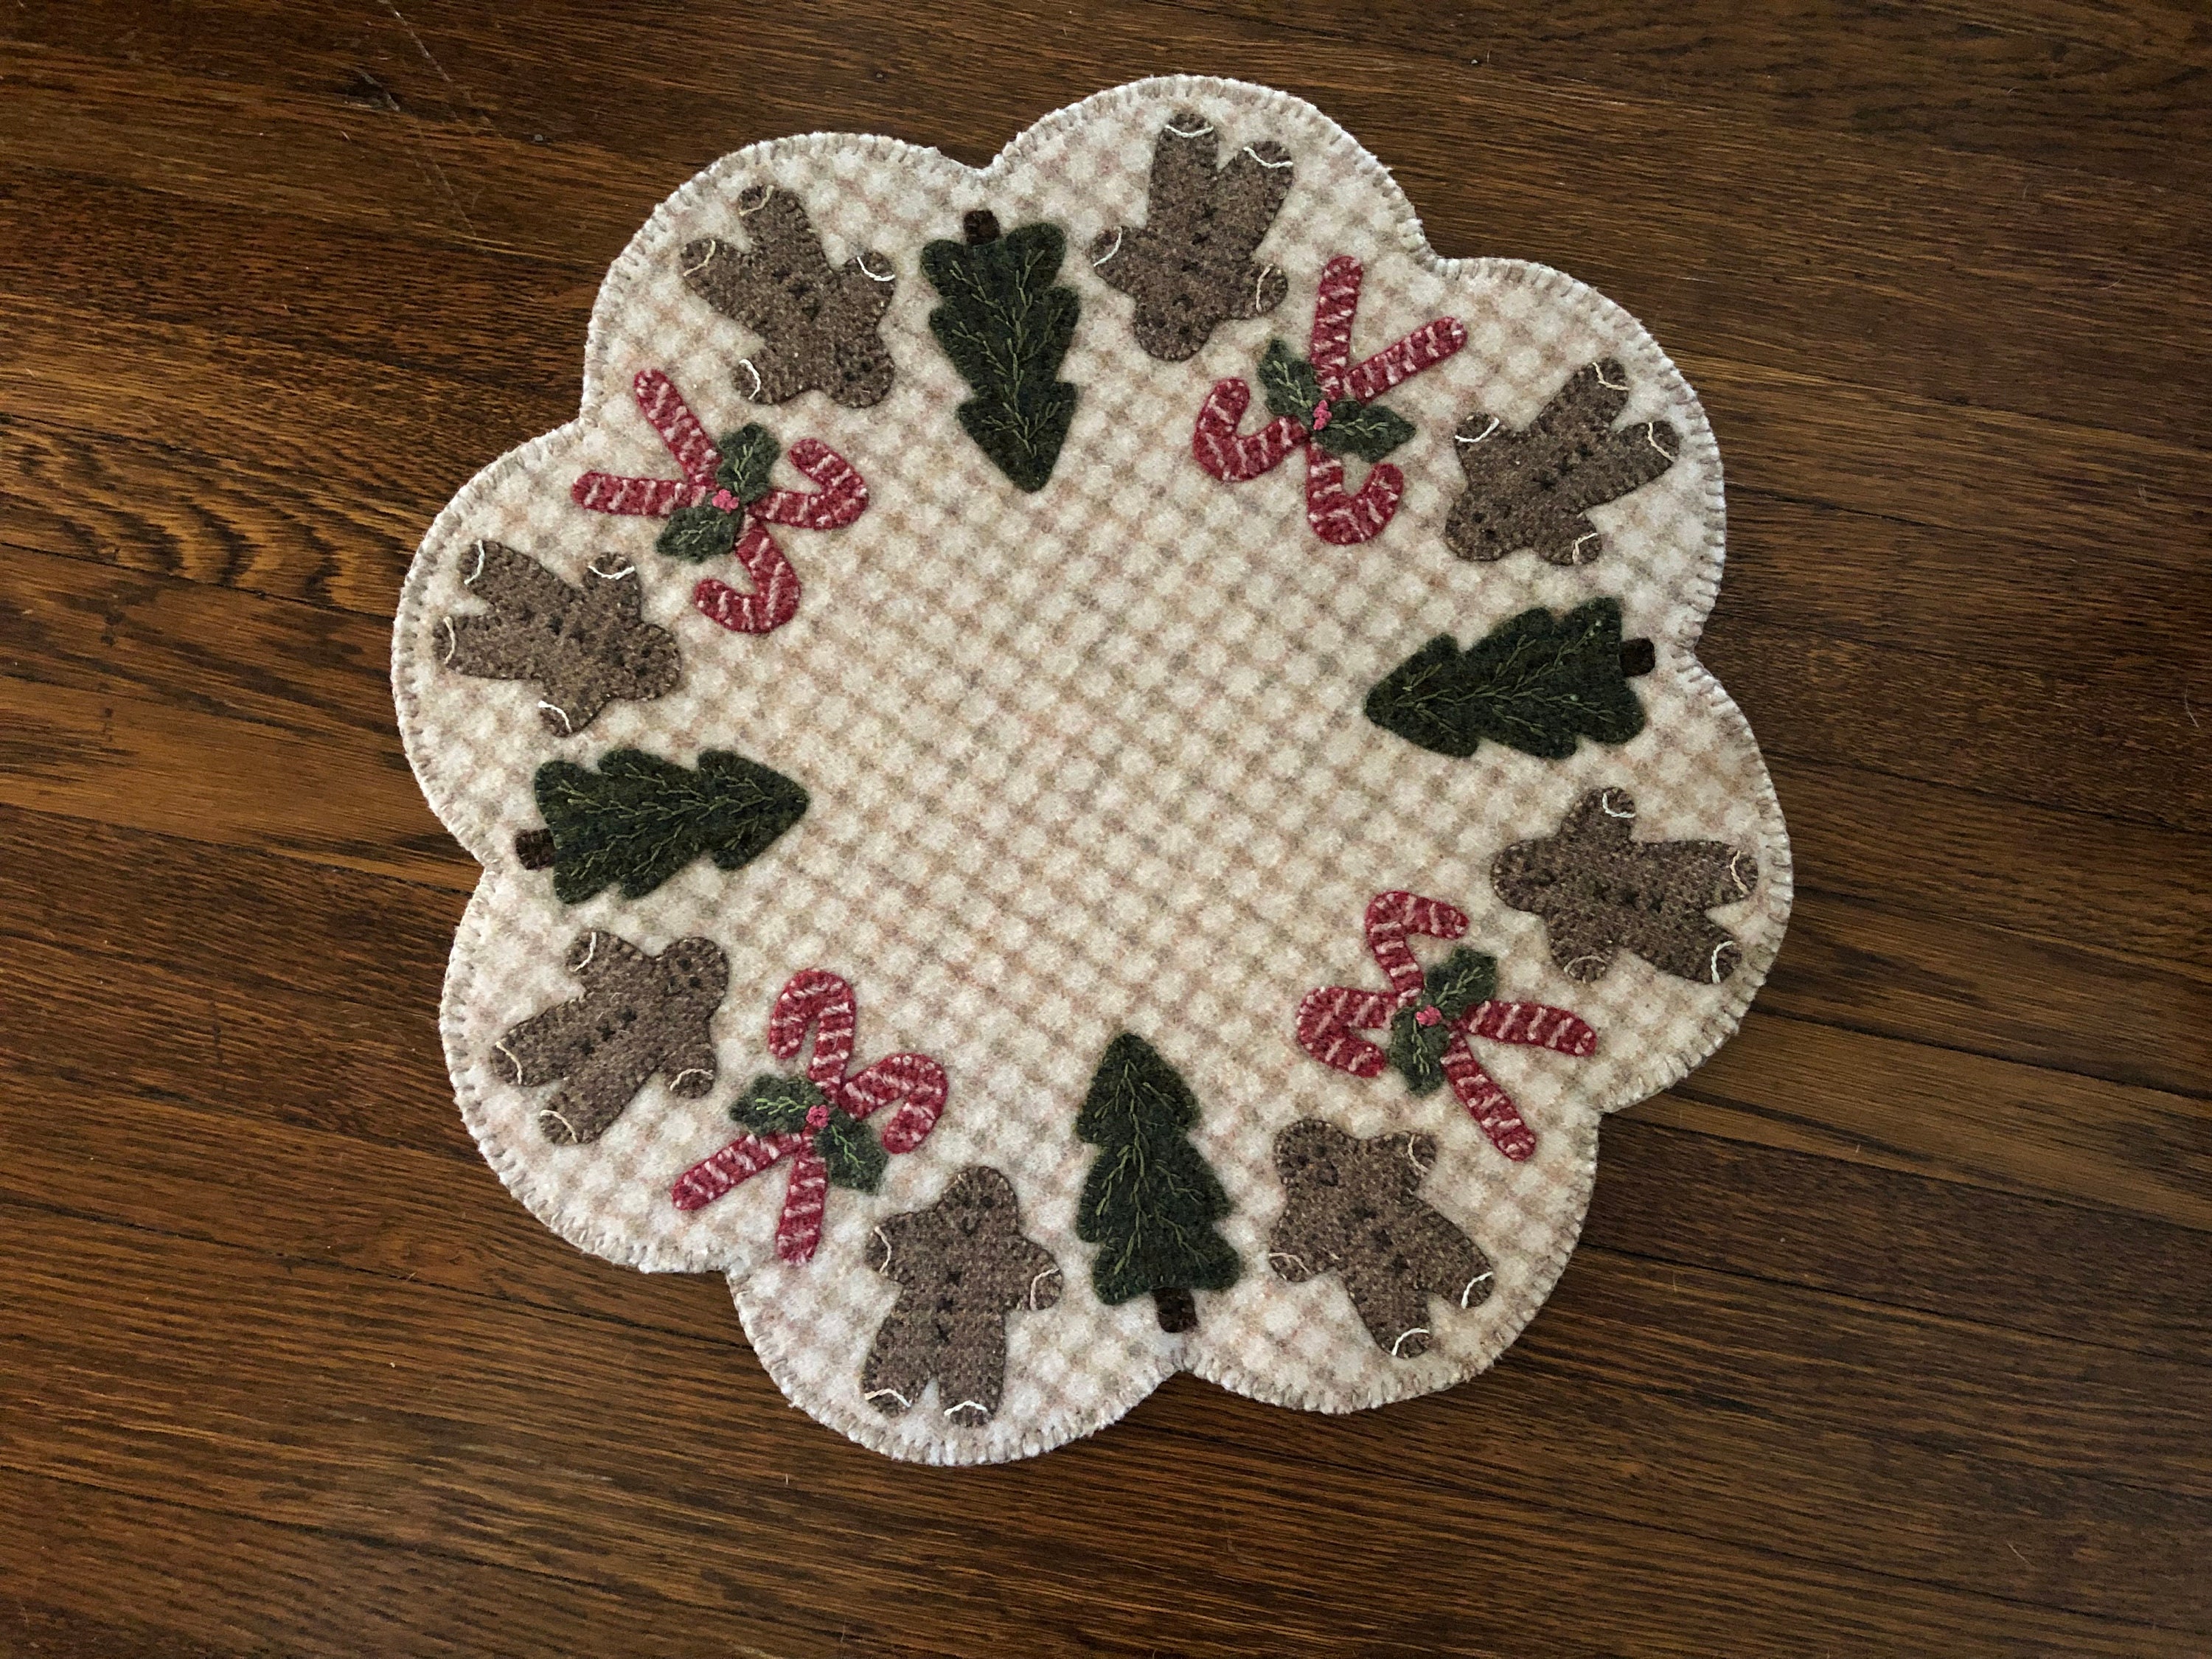 Wool Applique Kit: Round Hole Square Peg by Village Wool LLC